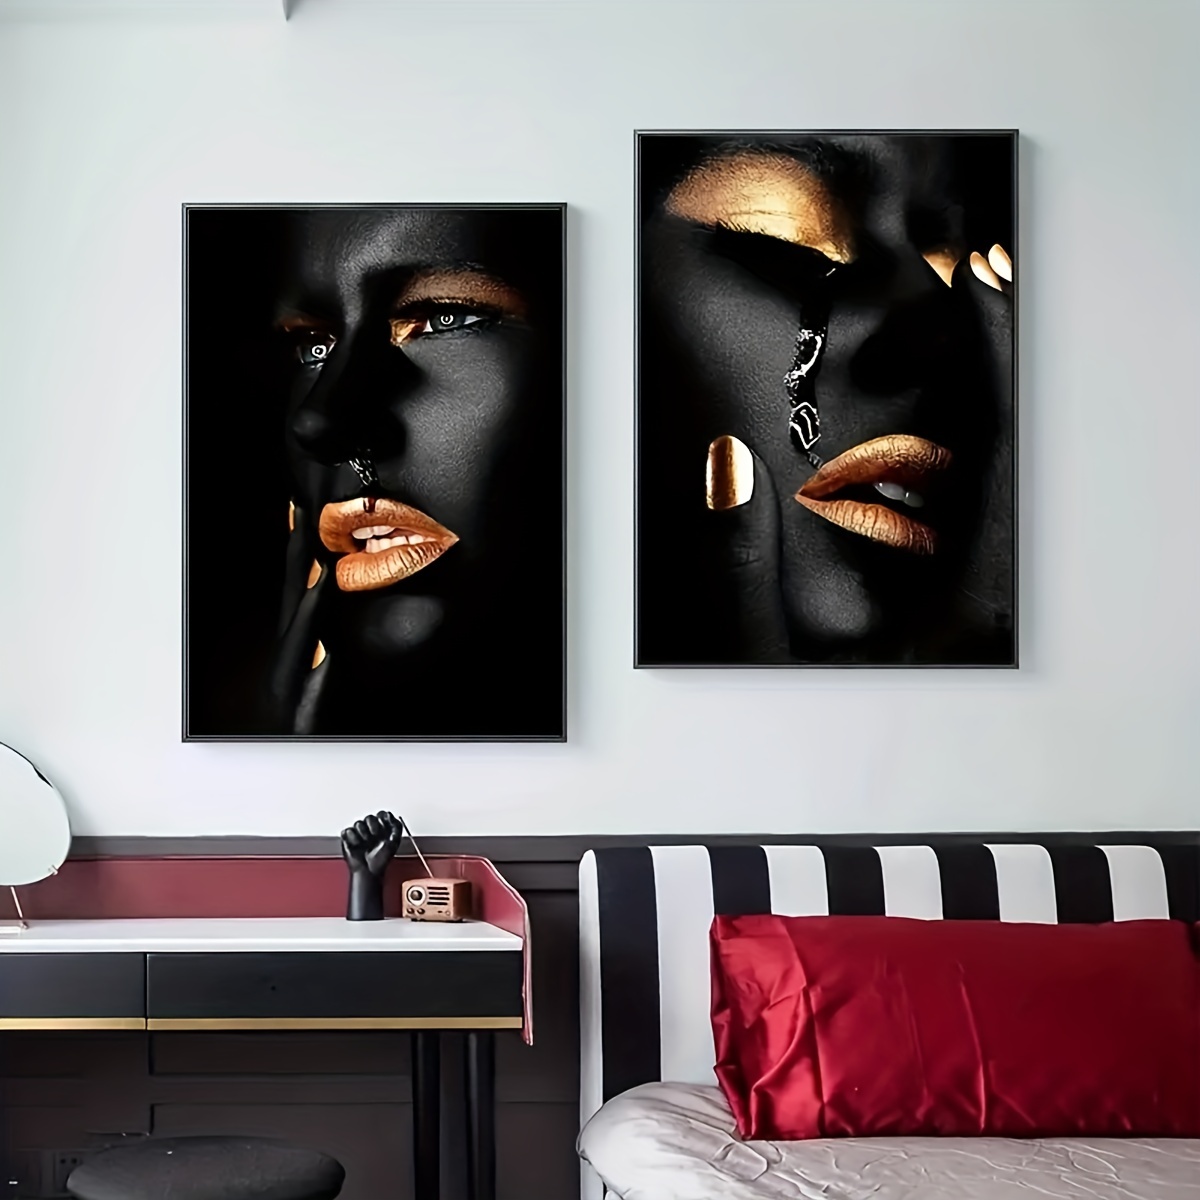 Buy African Art Black and Gold Woman Oil Painting on Canvas s and